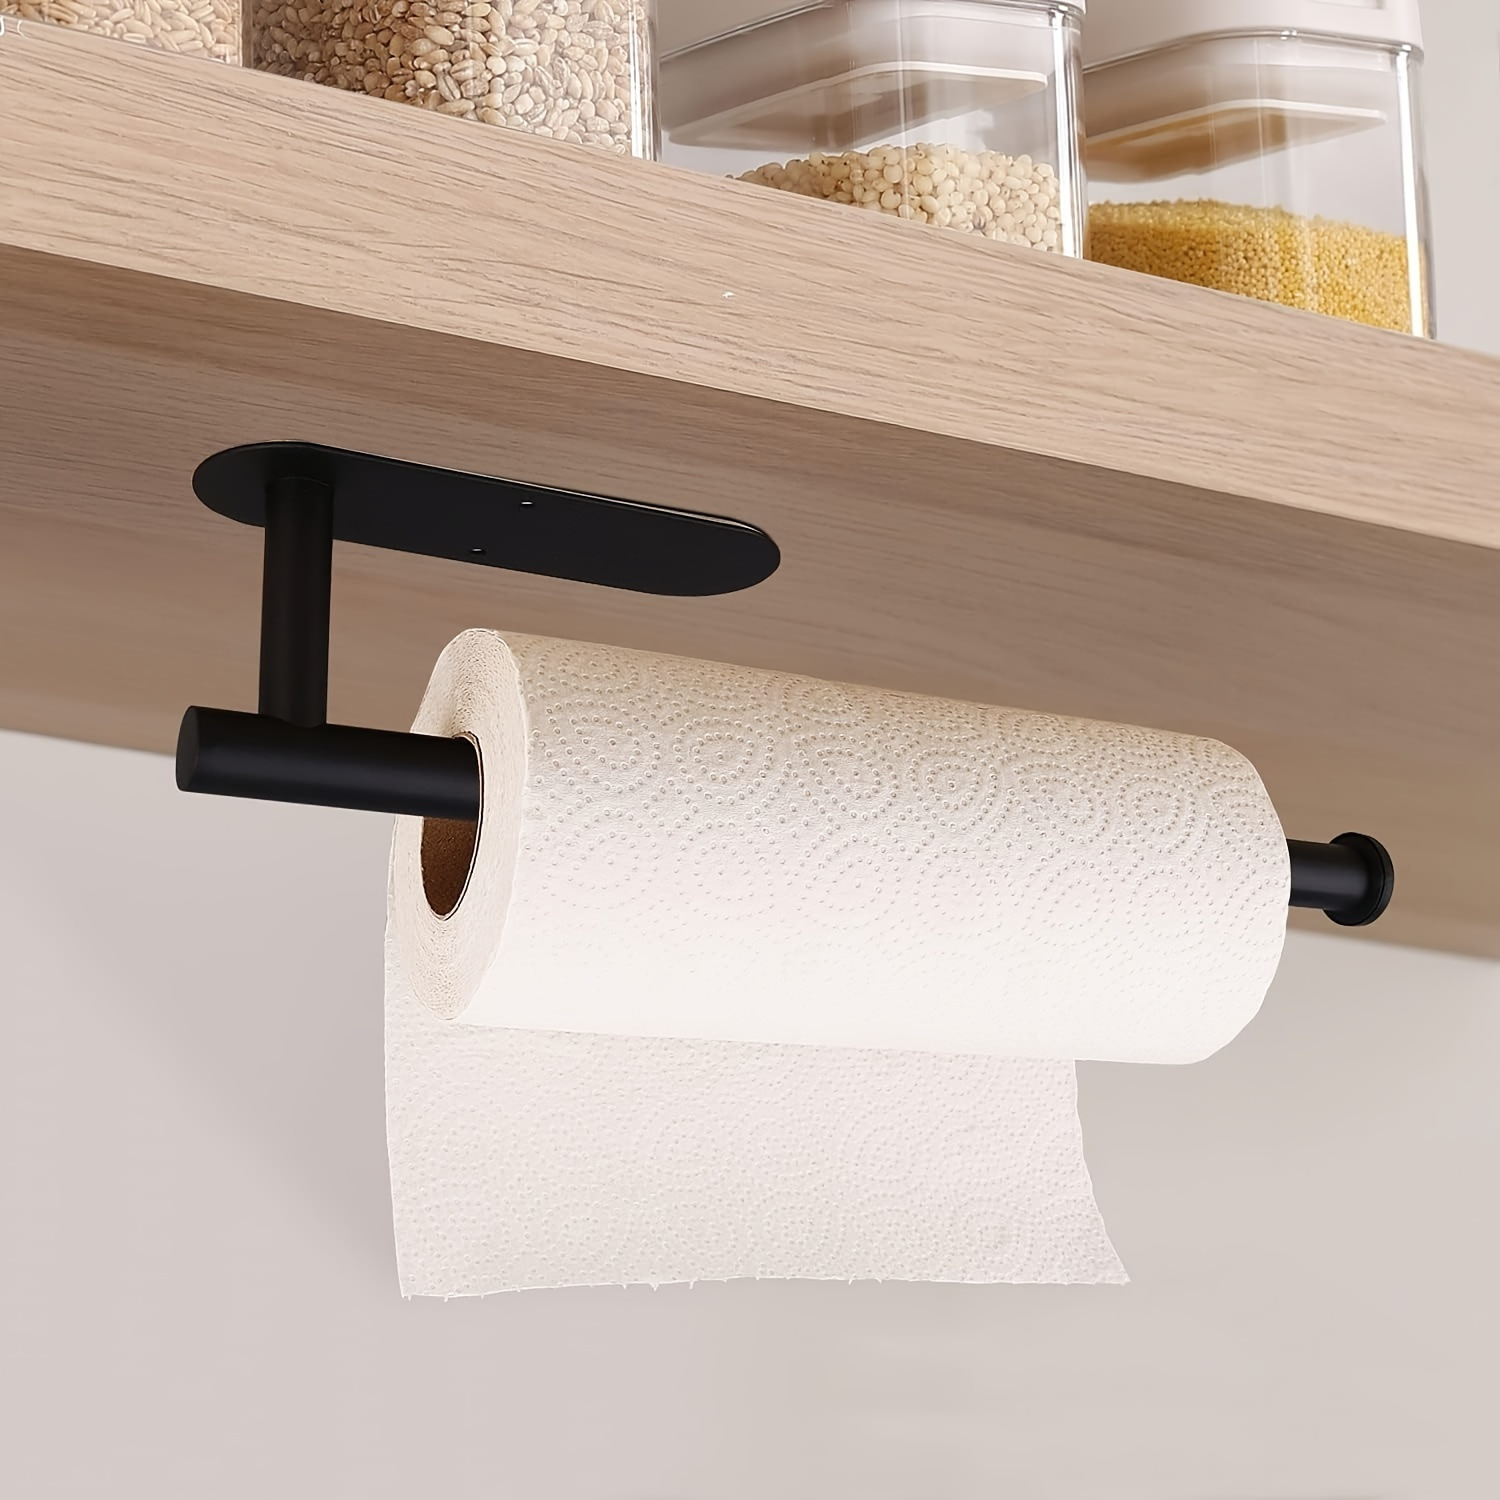 

Stainless Steel Paper Towel Holder - Heavy-duty, Wall-mounted Rack For Kitchen & Bathroom Under Cabinet Storage